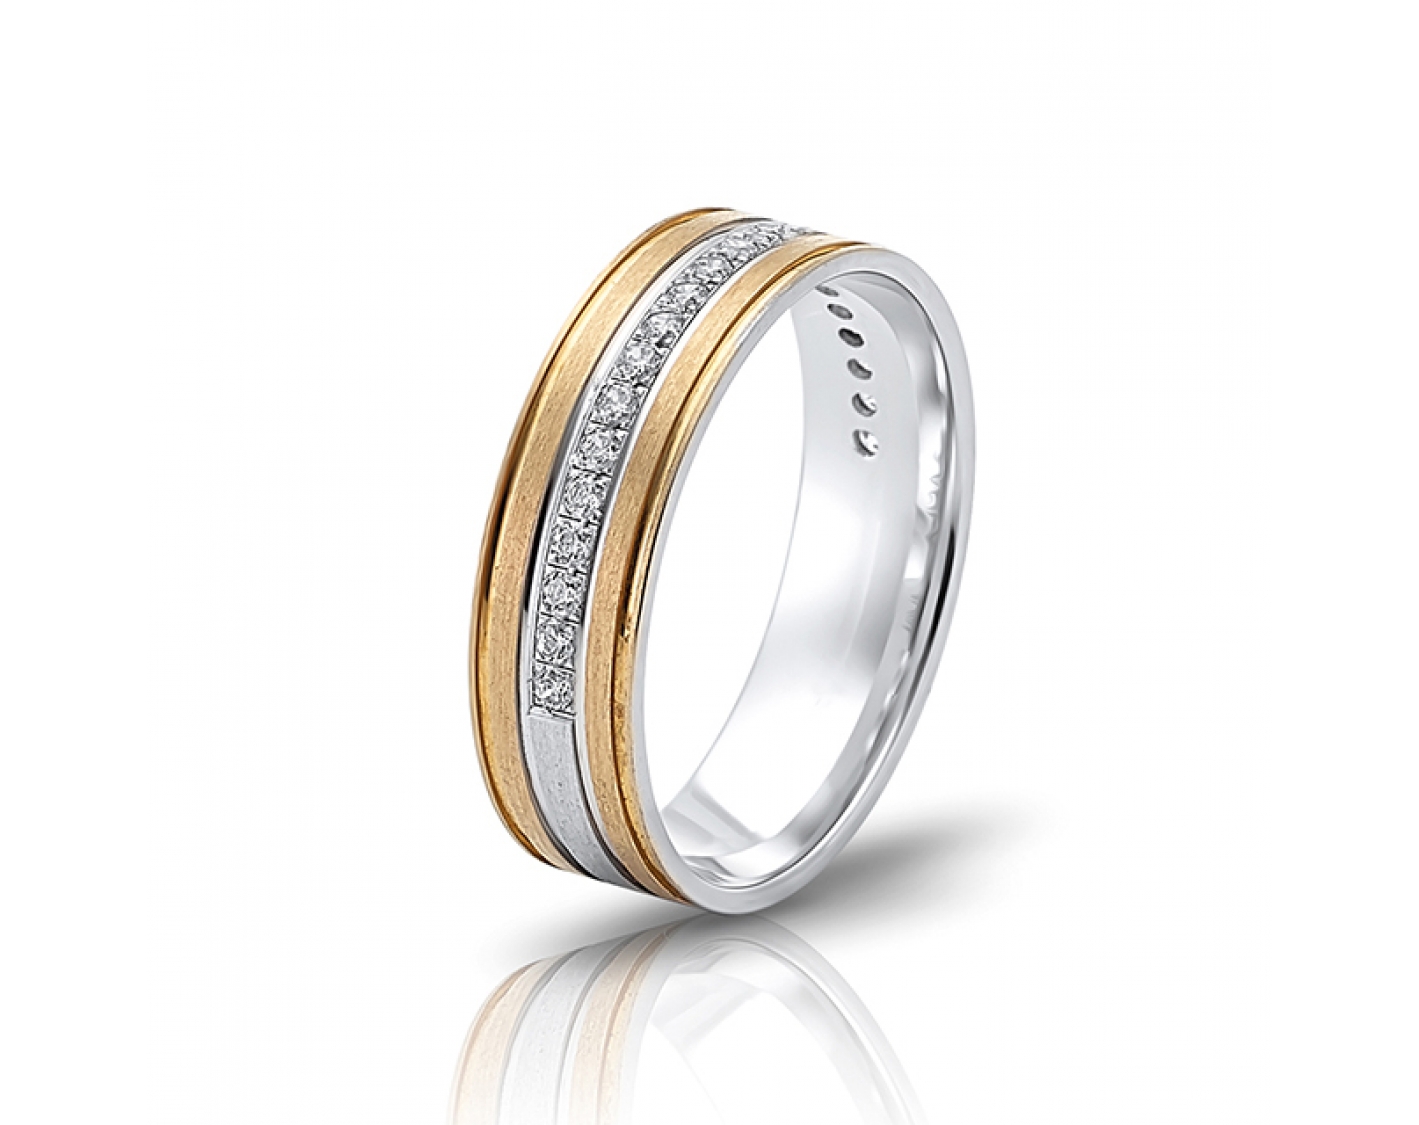 dual-tone 6mm two-toned* half eternity wedding band Photos & images